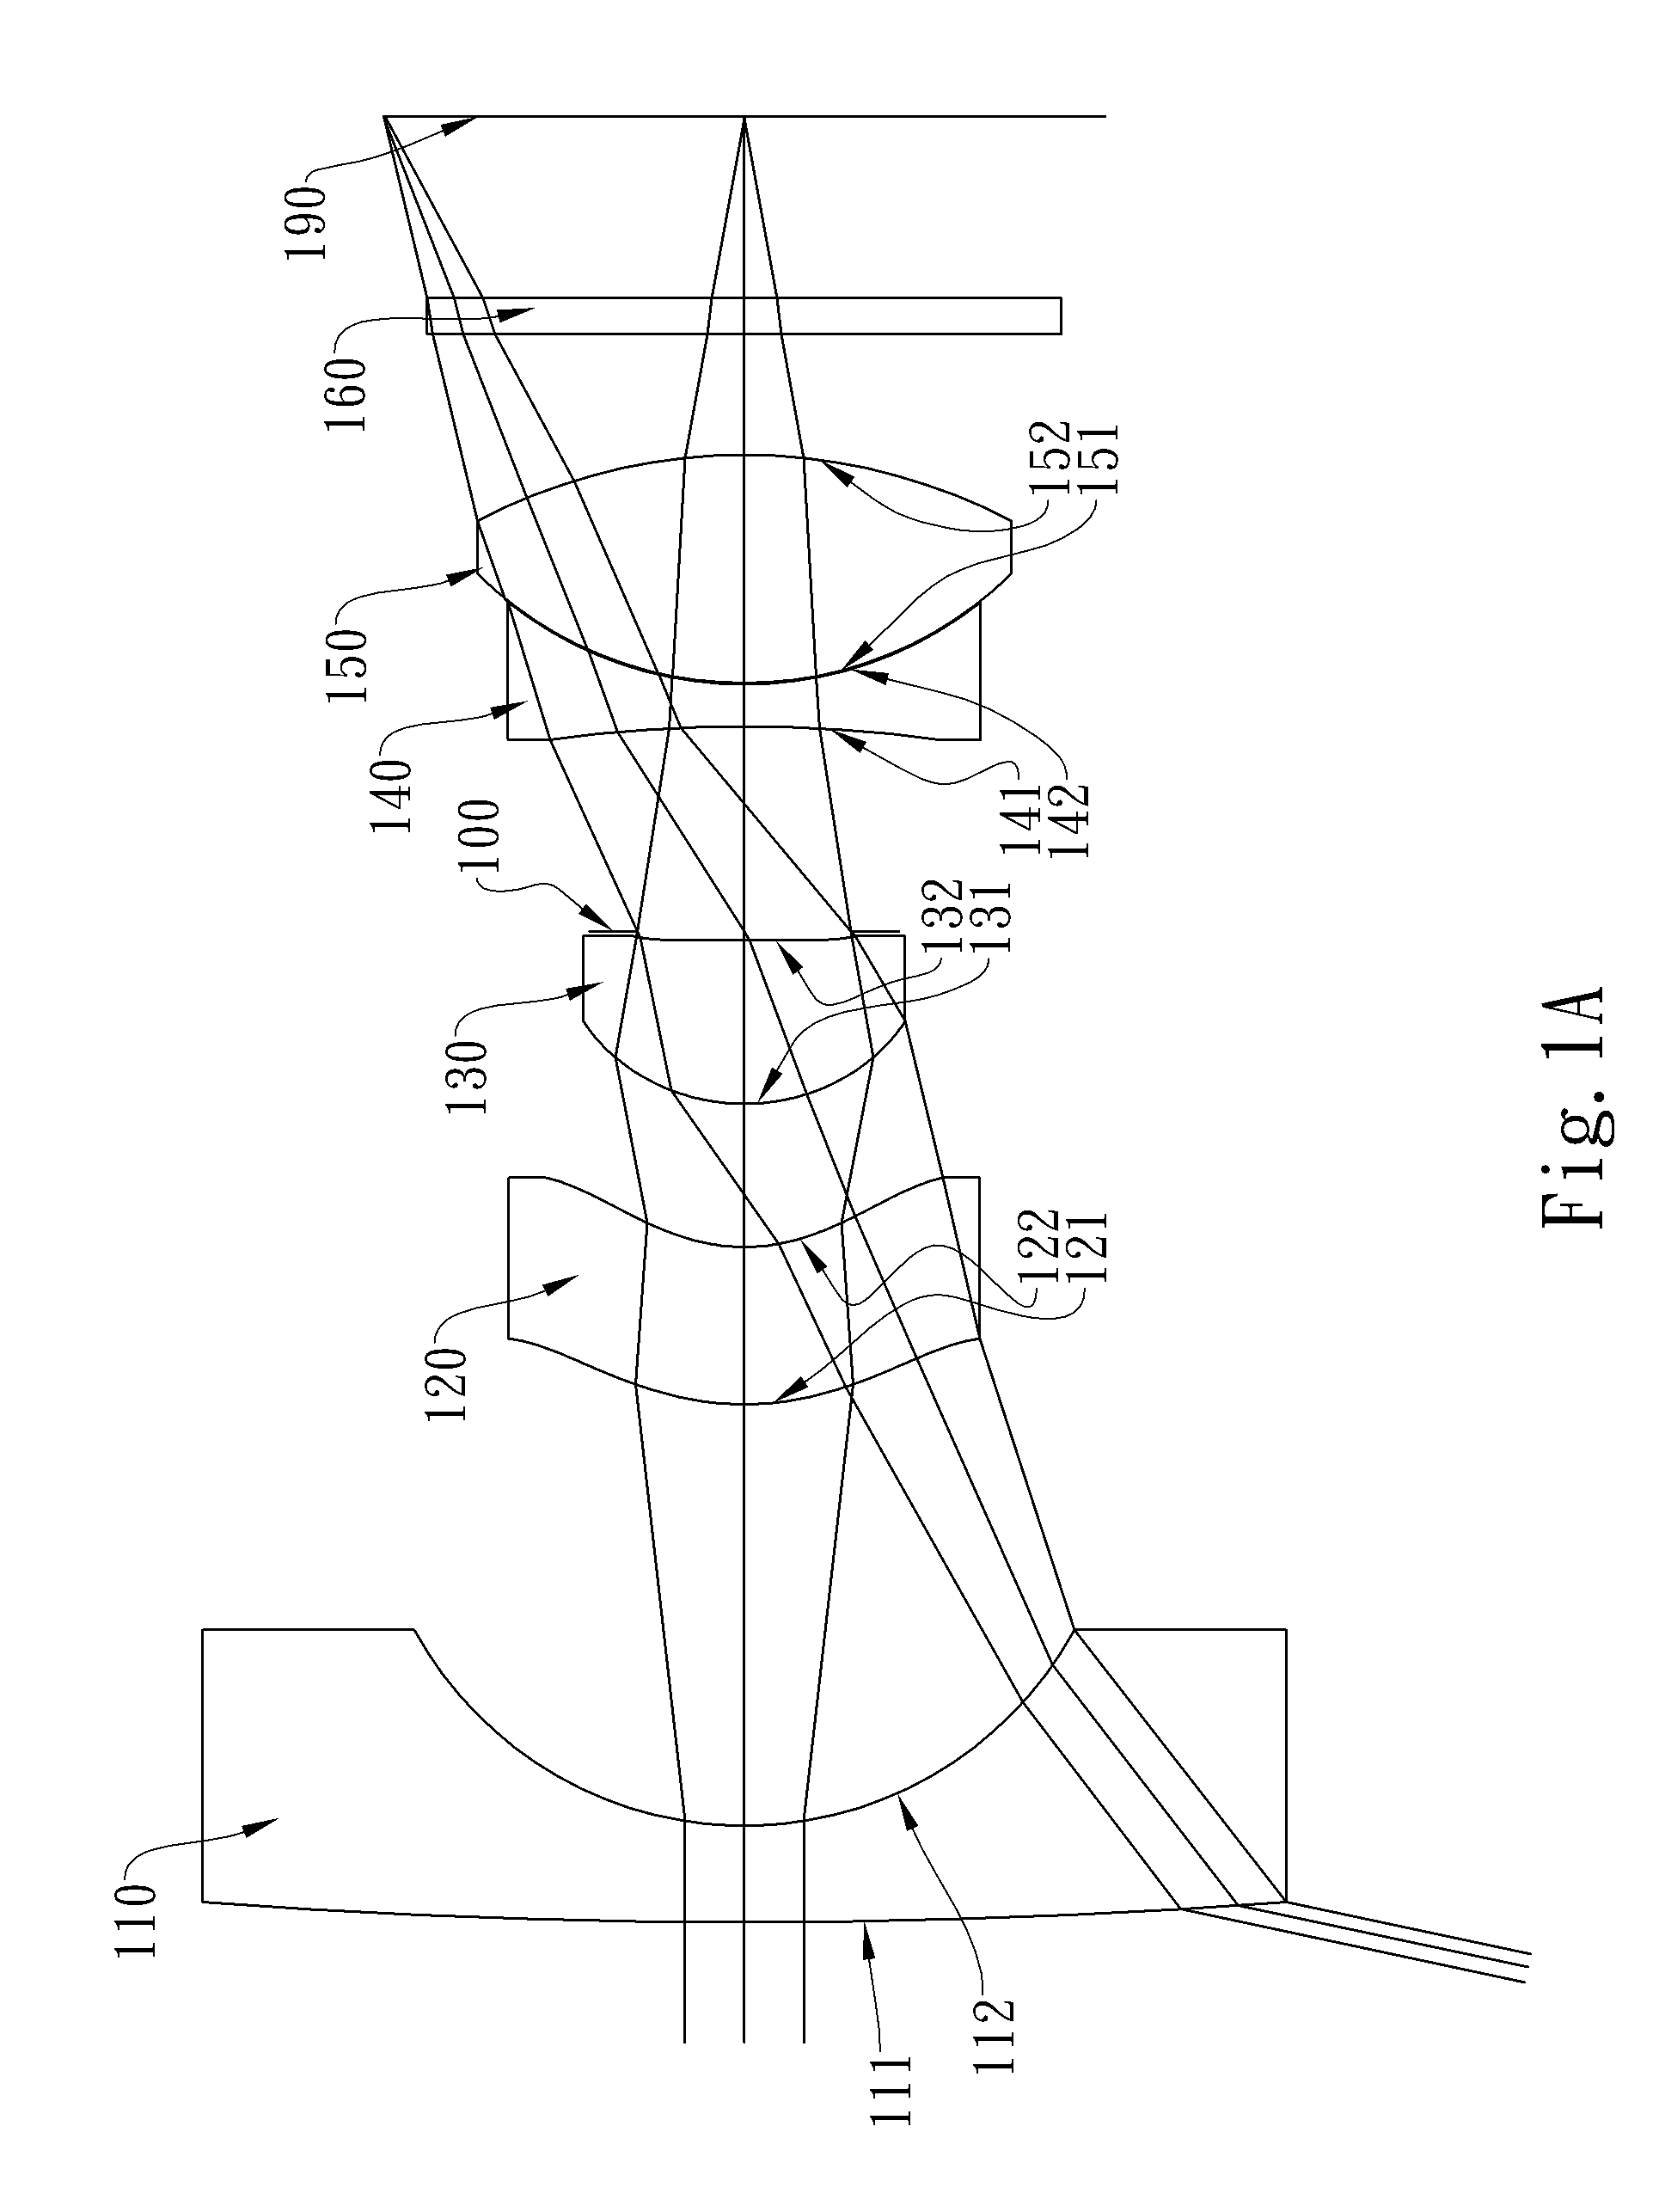 Wide-angle imaging lens assembly